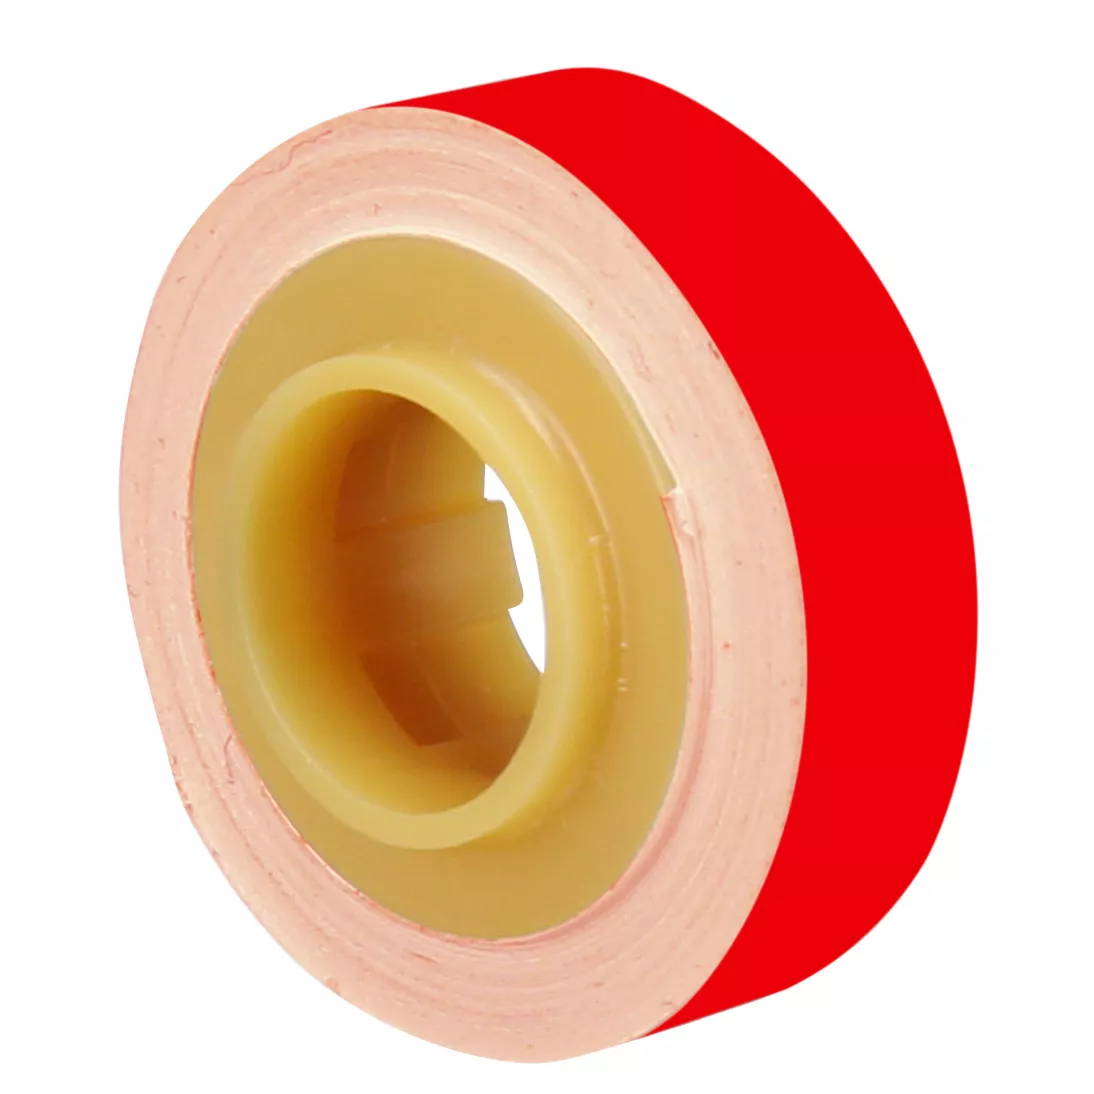 3M™ ScotchCode™ Wire Marker Tape Refill Roll SDR-RD, Red, 50 Rolls/Case